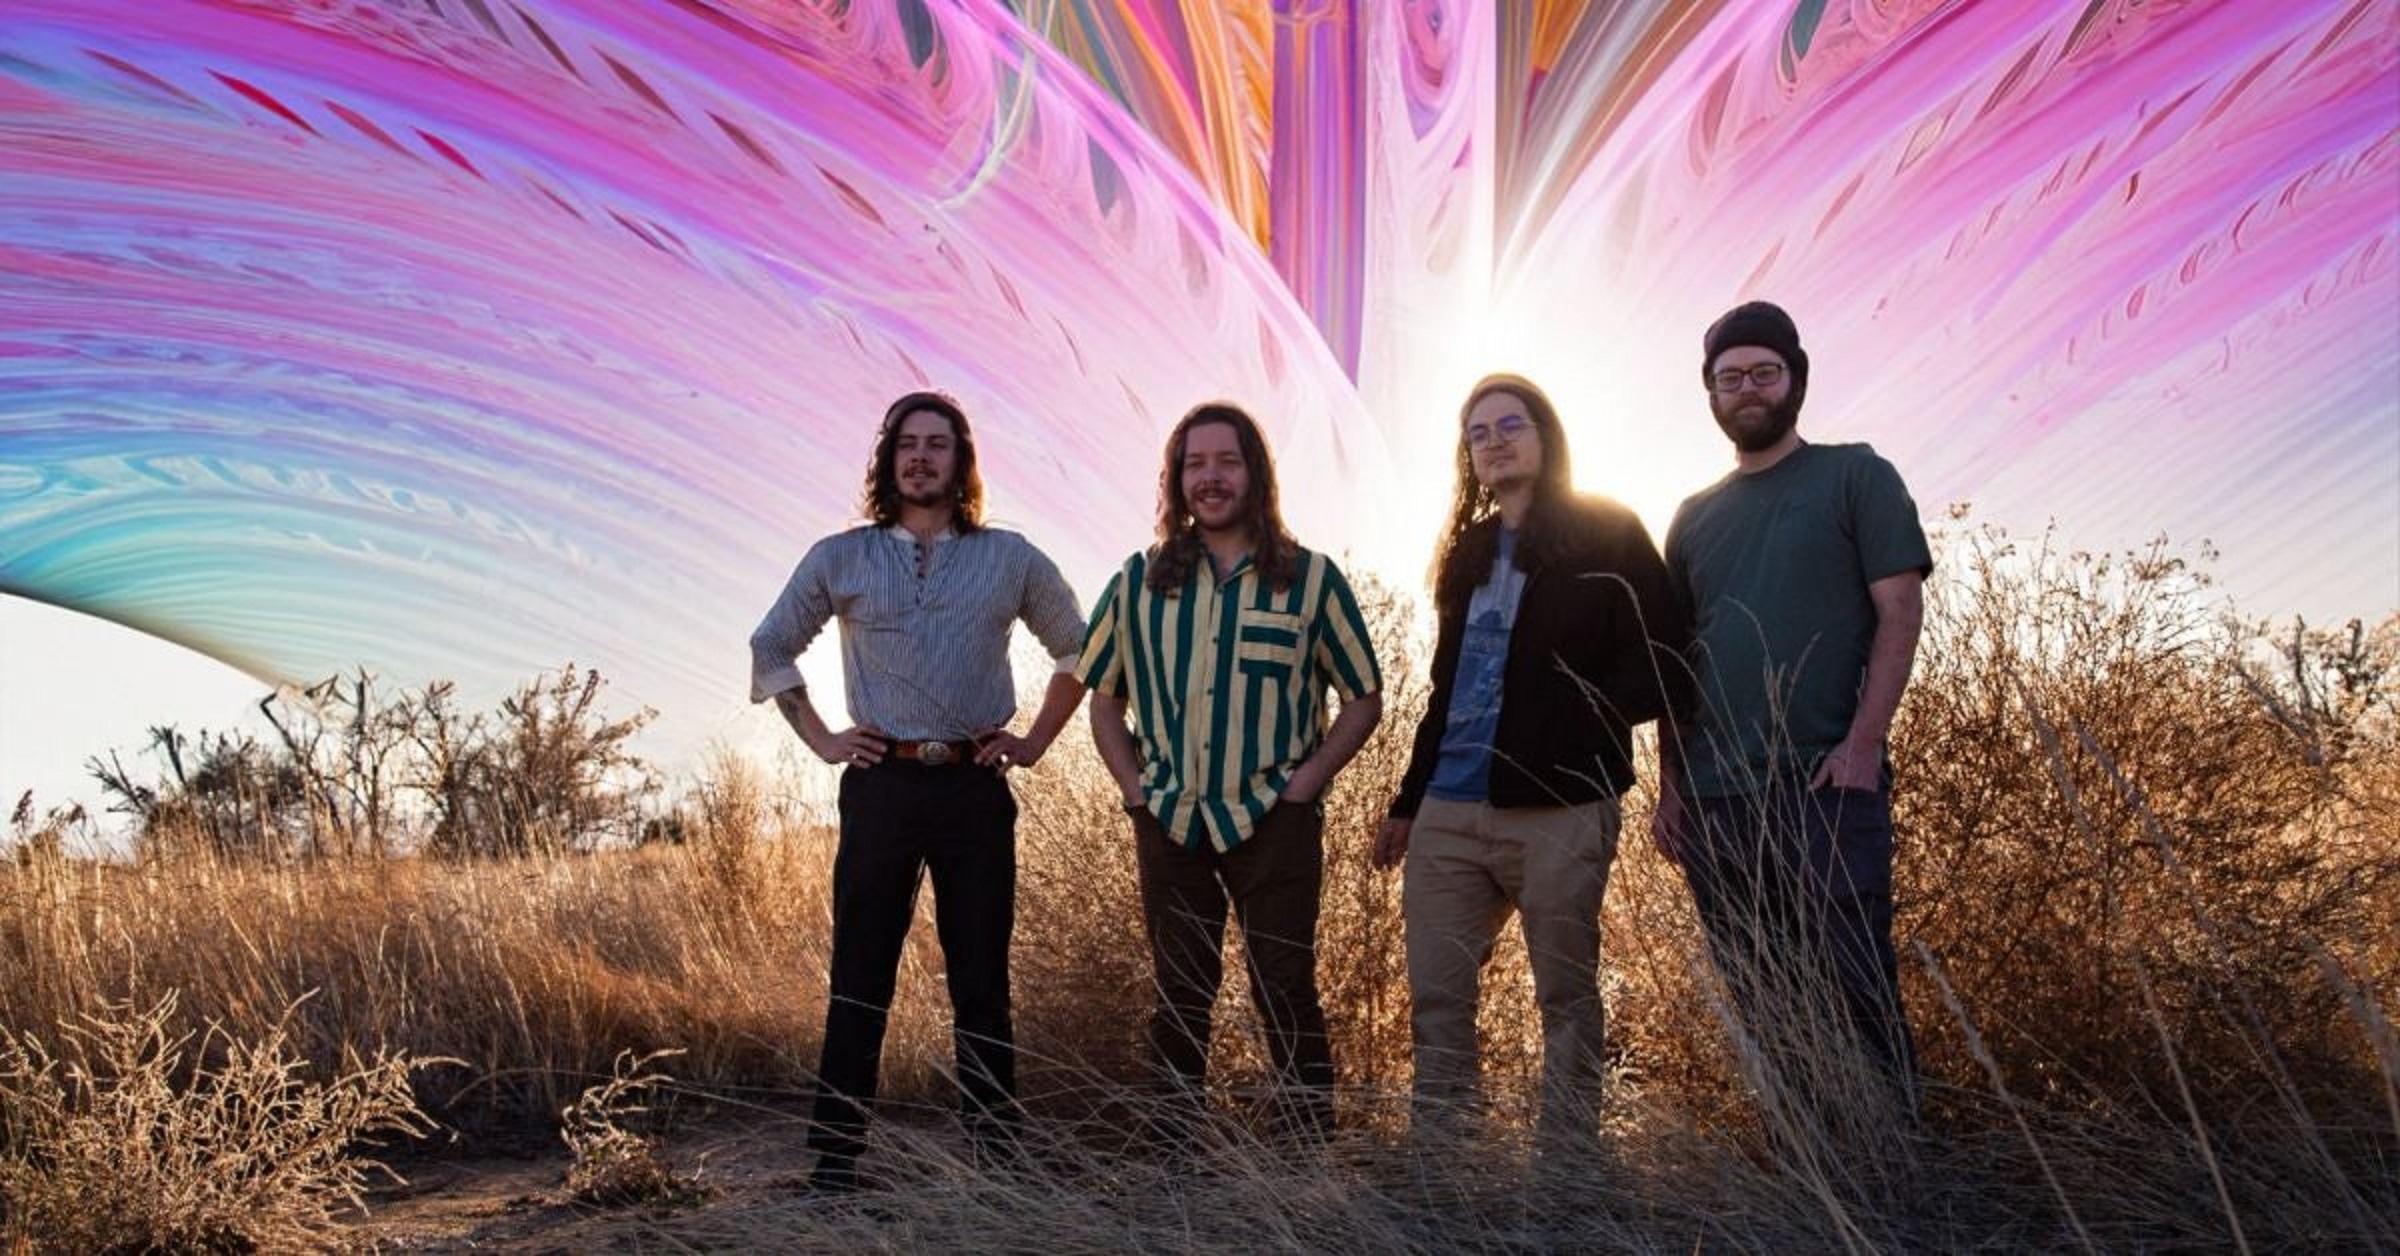 Pool Sharks Set to Dazzle Audiences at the Citrus Fox Theatre with Their Unique Brand of Psychedelic Rock